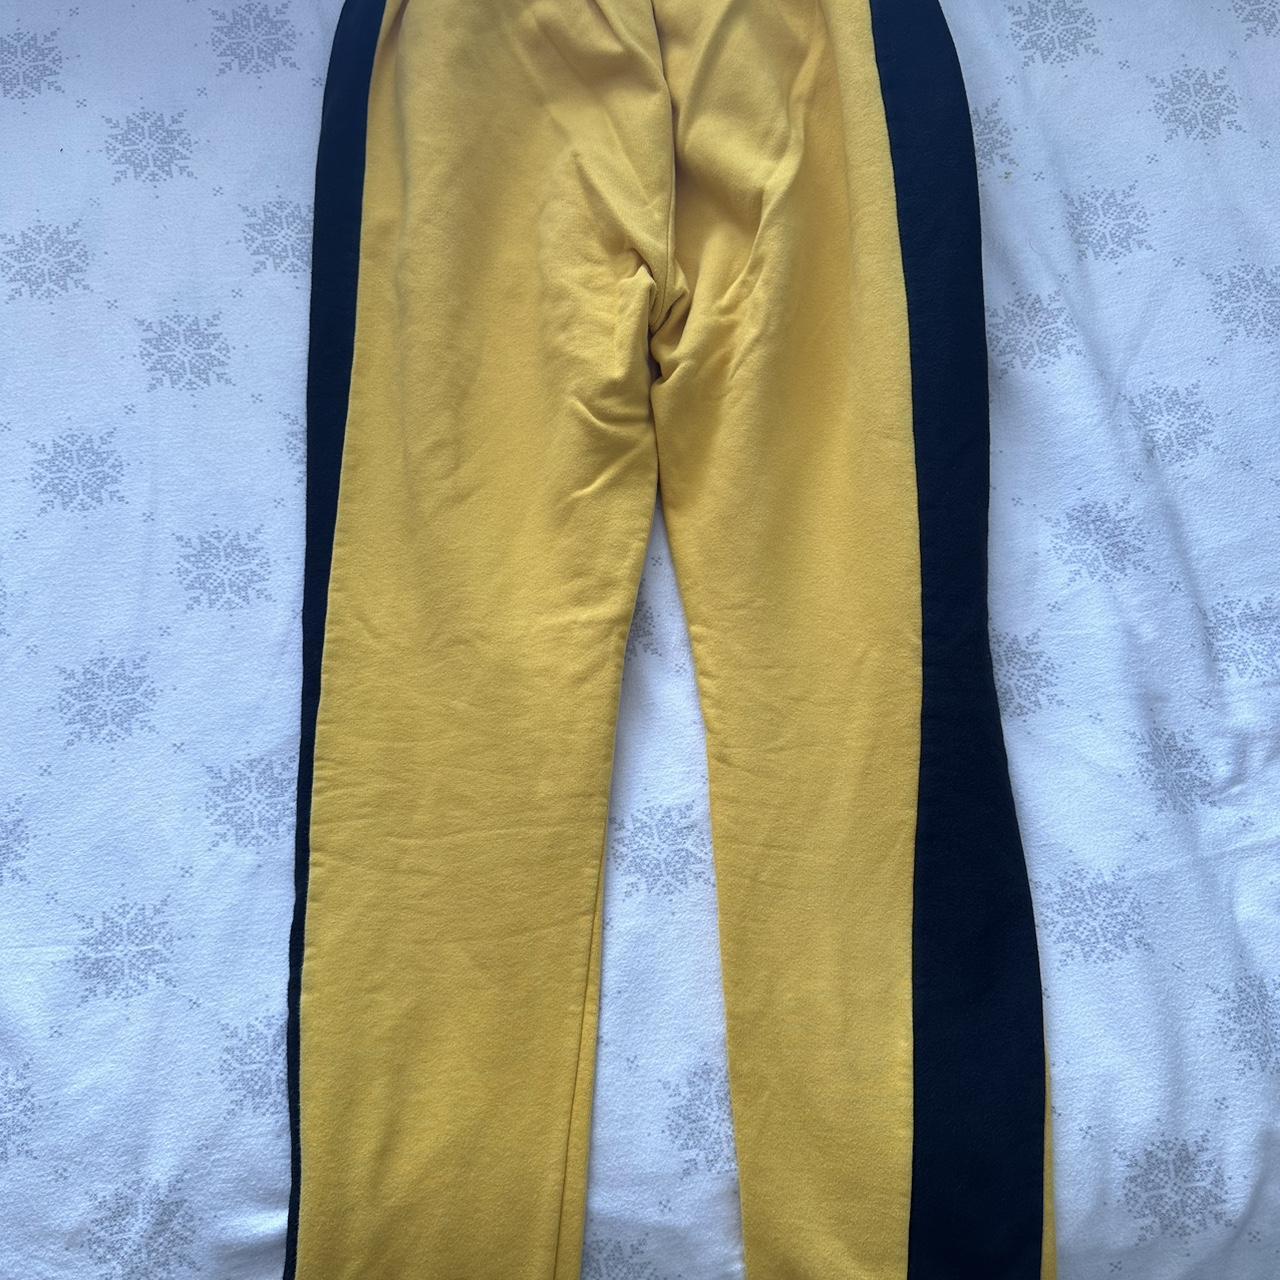 Ellesse Men's Yellow and Black Joggers-tracksuits (2)